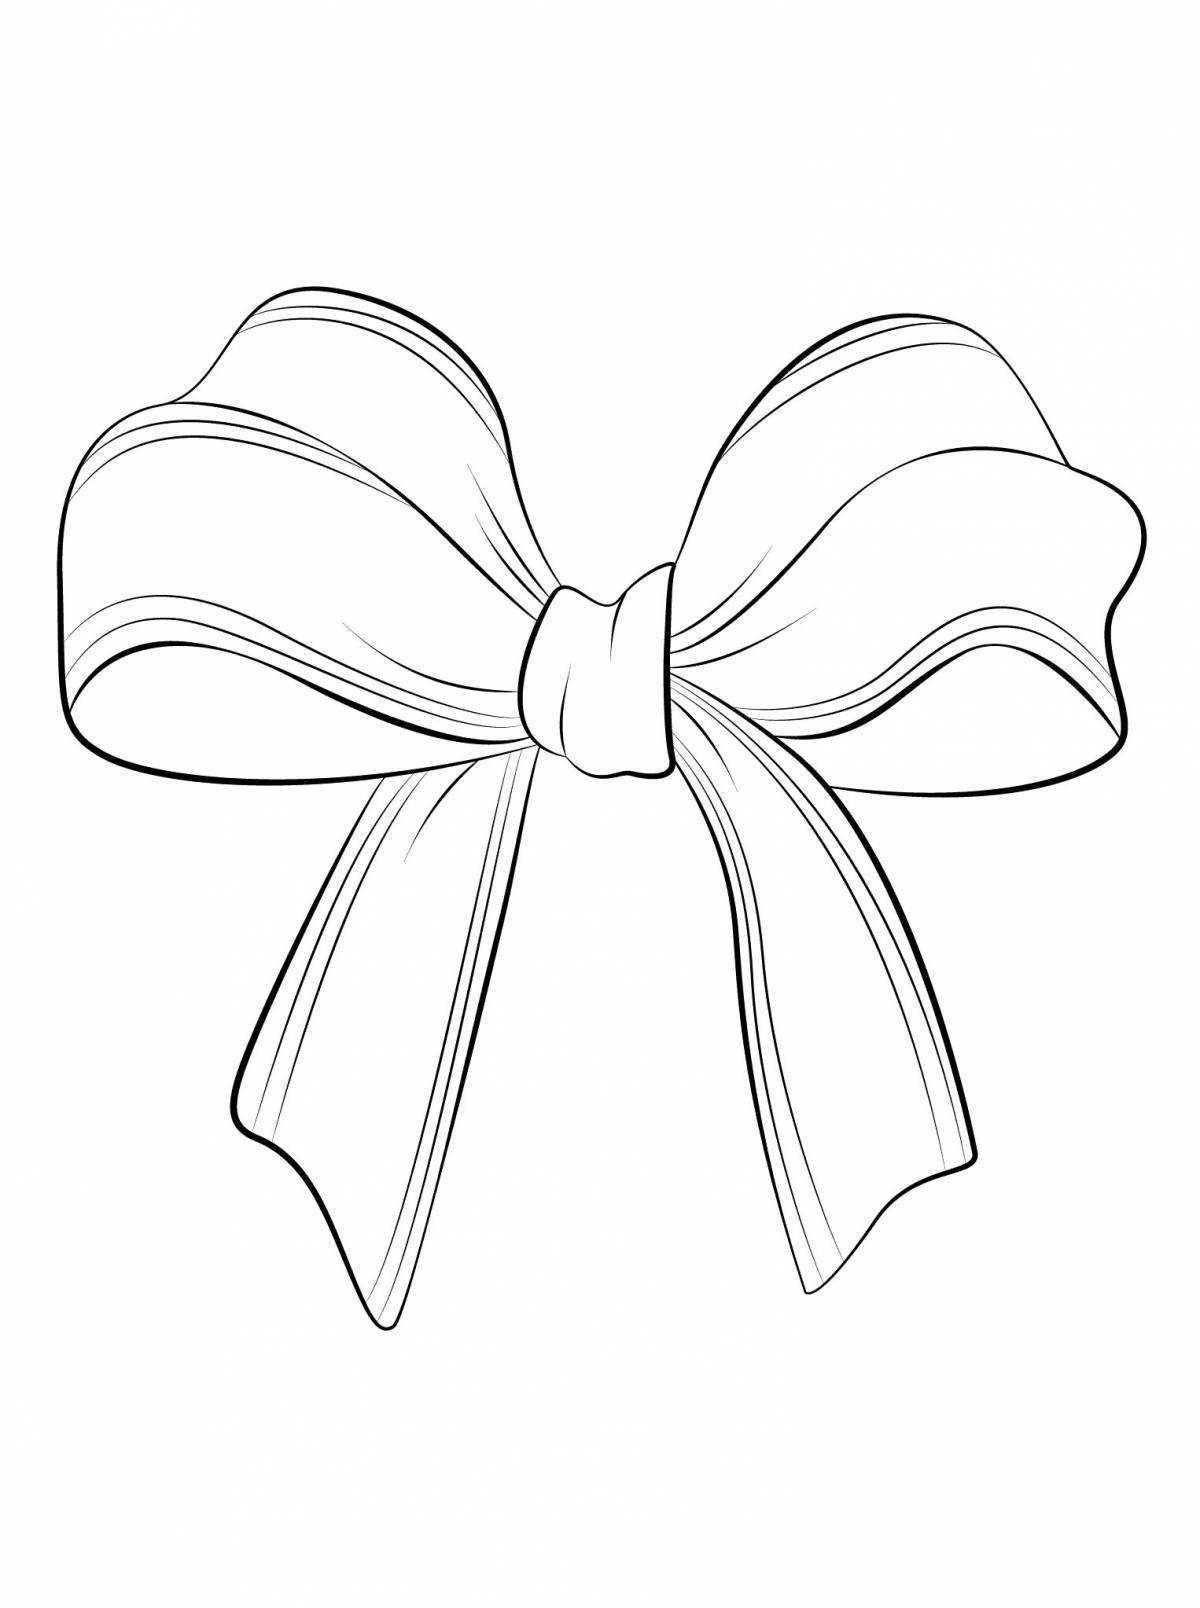 Coloring book with bright bows for children